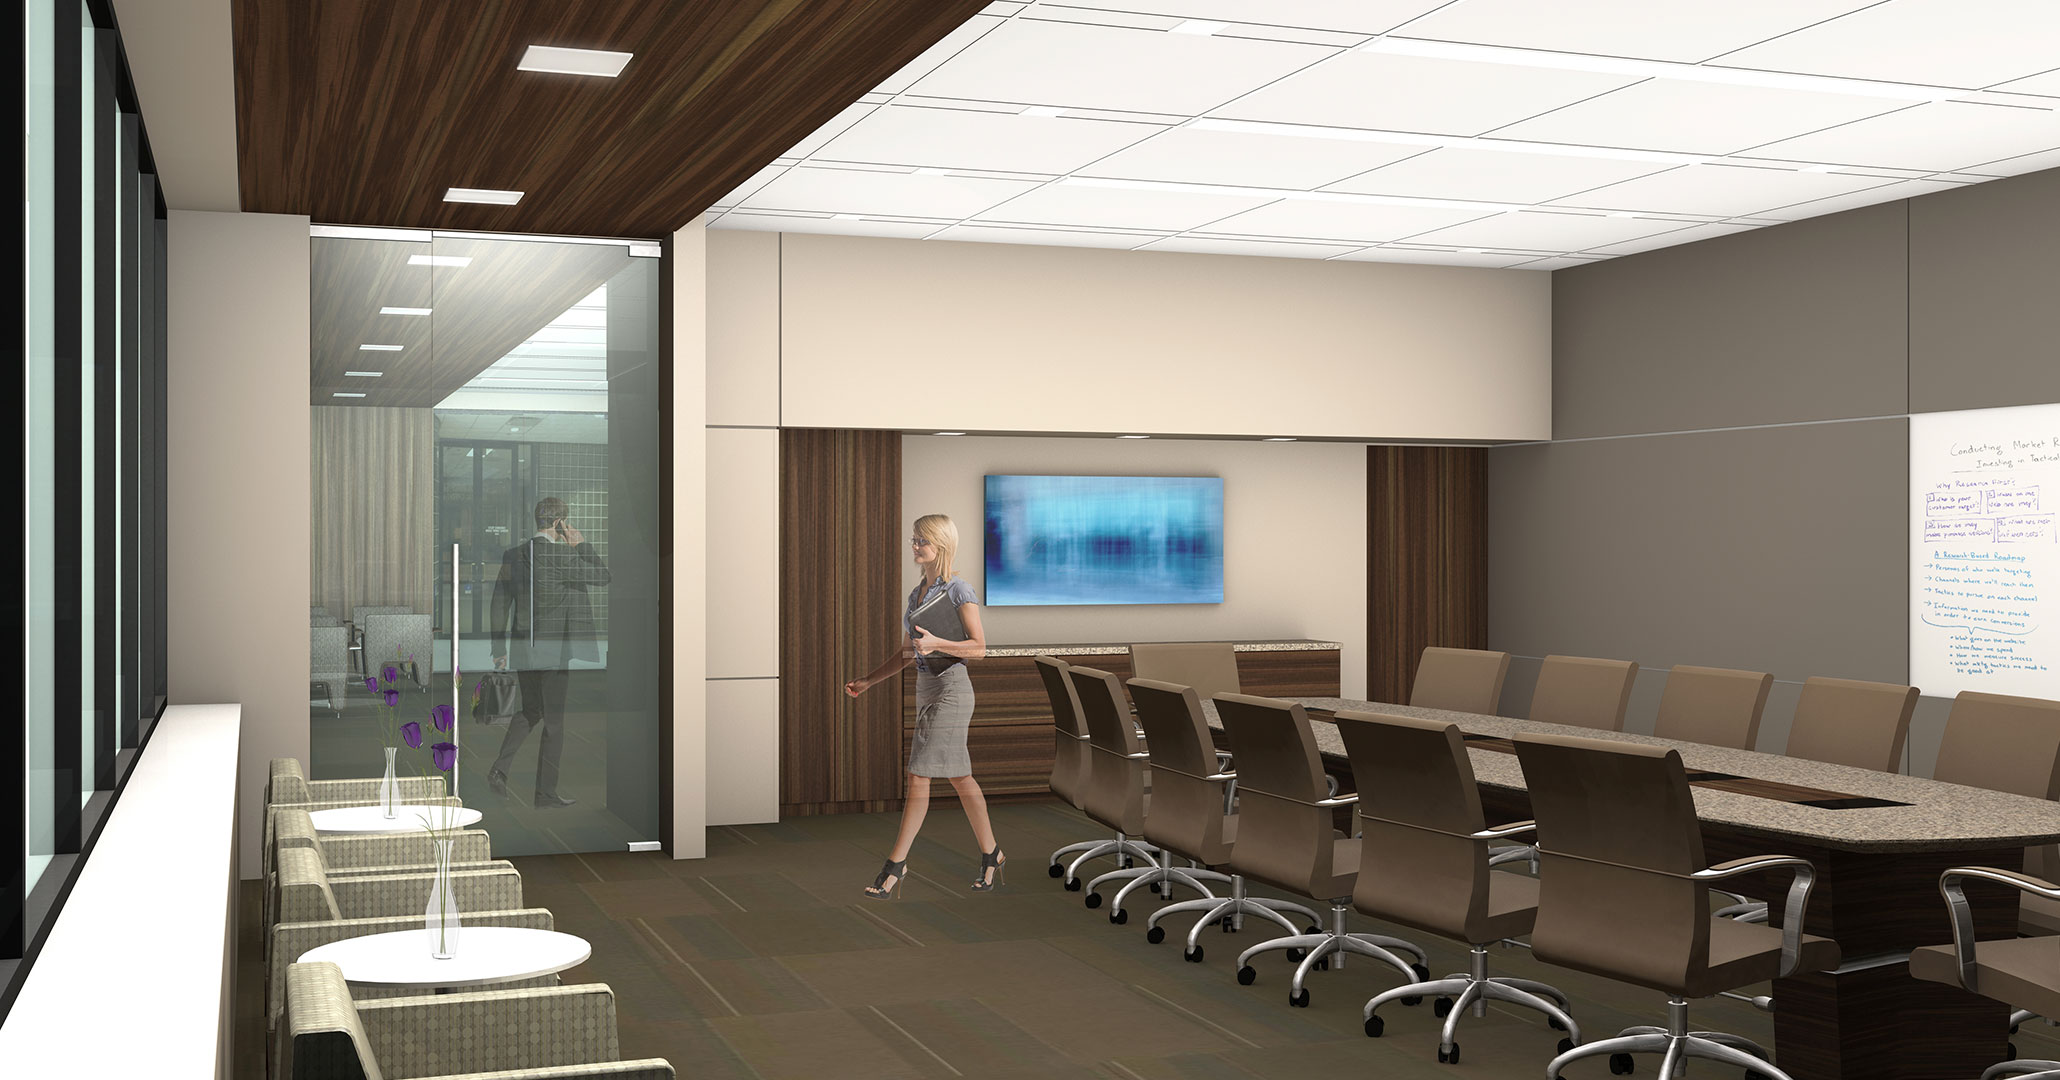 Boudreaux architects have worked with Aflac to provide interior design for their growing office spaces.